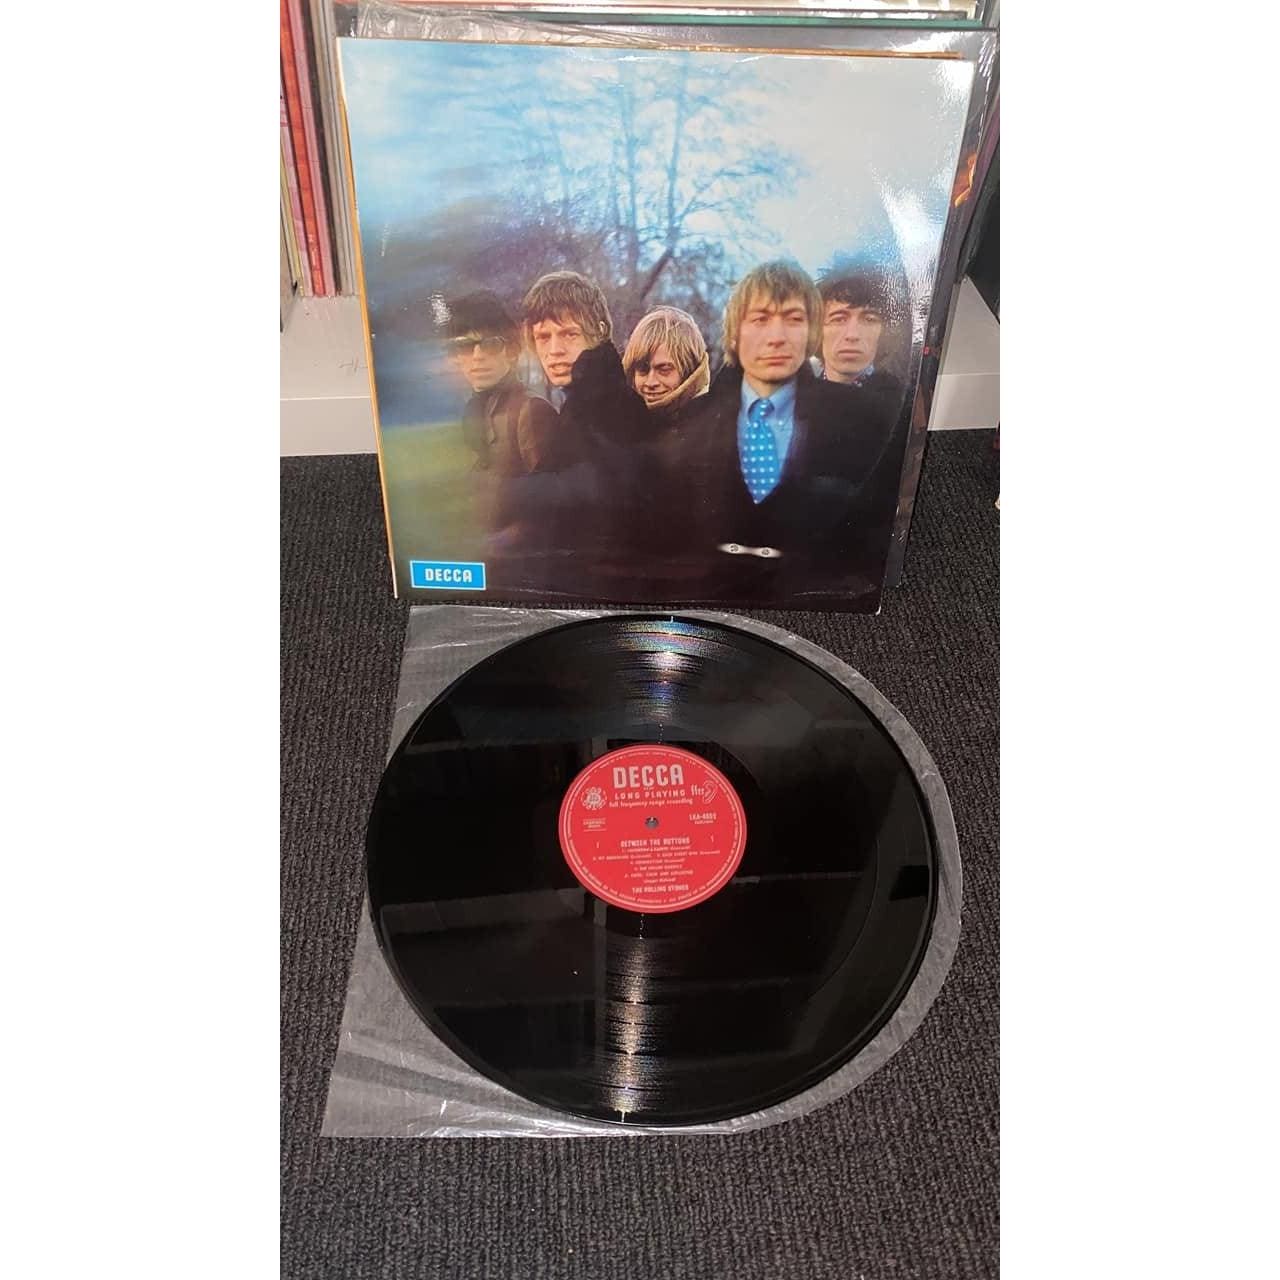 THE ROLLING STONES - Between The Buttons Vinyl (SECOND HAND) - JWrayRecords